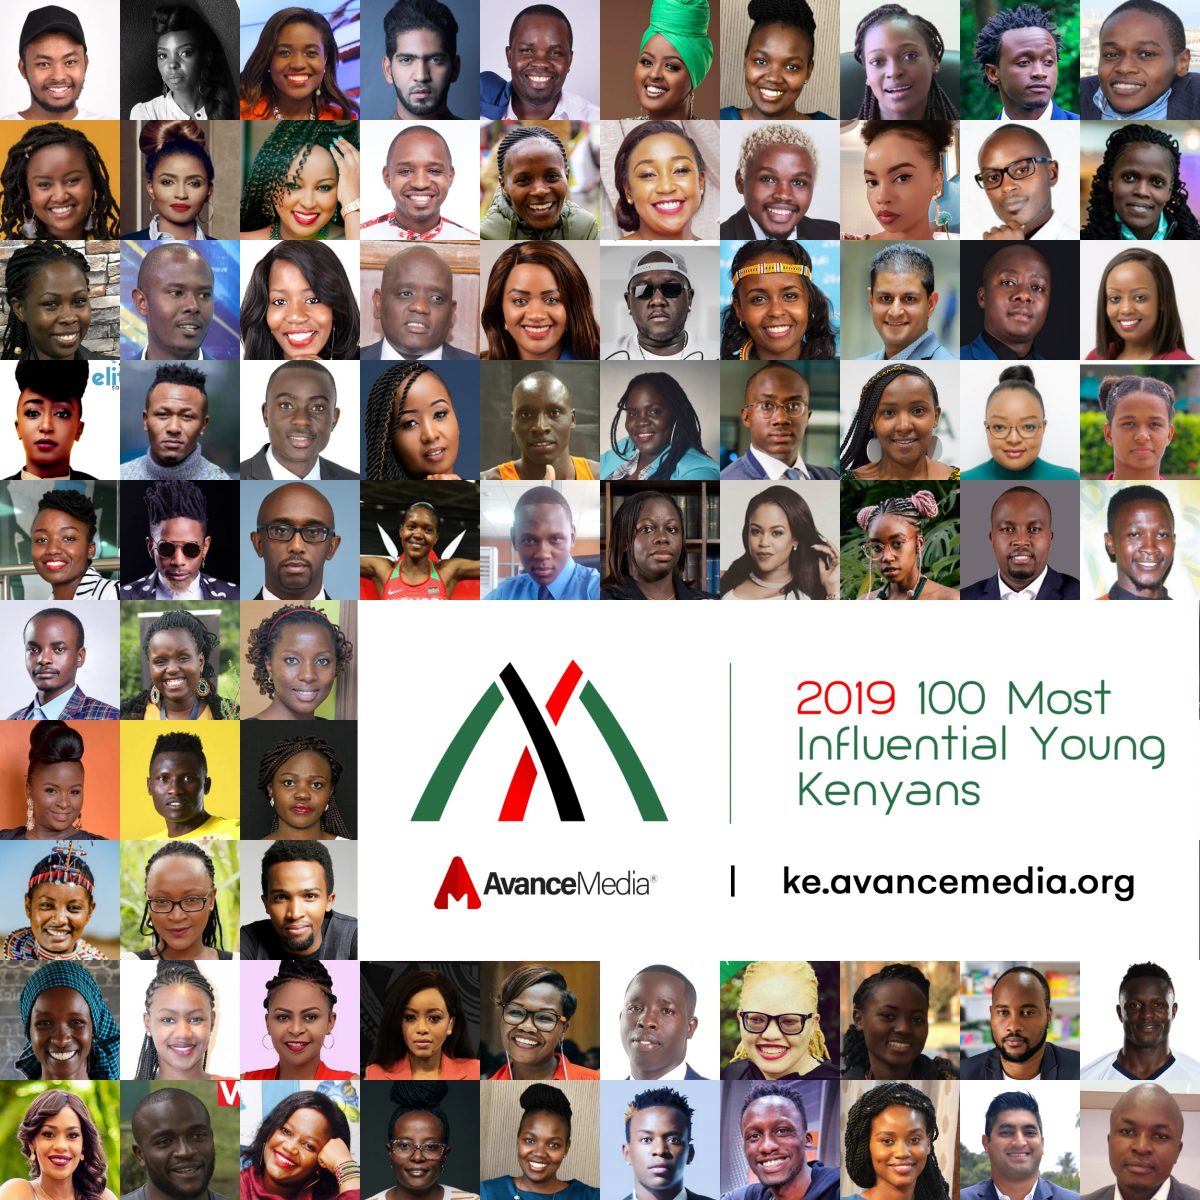 The most anticipated annual list of young Kenyans, 100 Most Influential Young Kenyans, which is curated by leading PR & Rating firm, Avance Media, has been released.